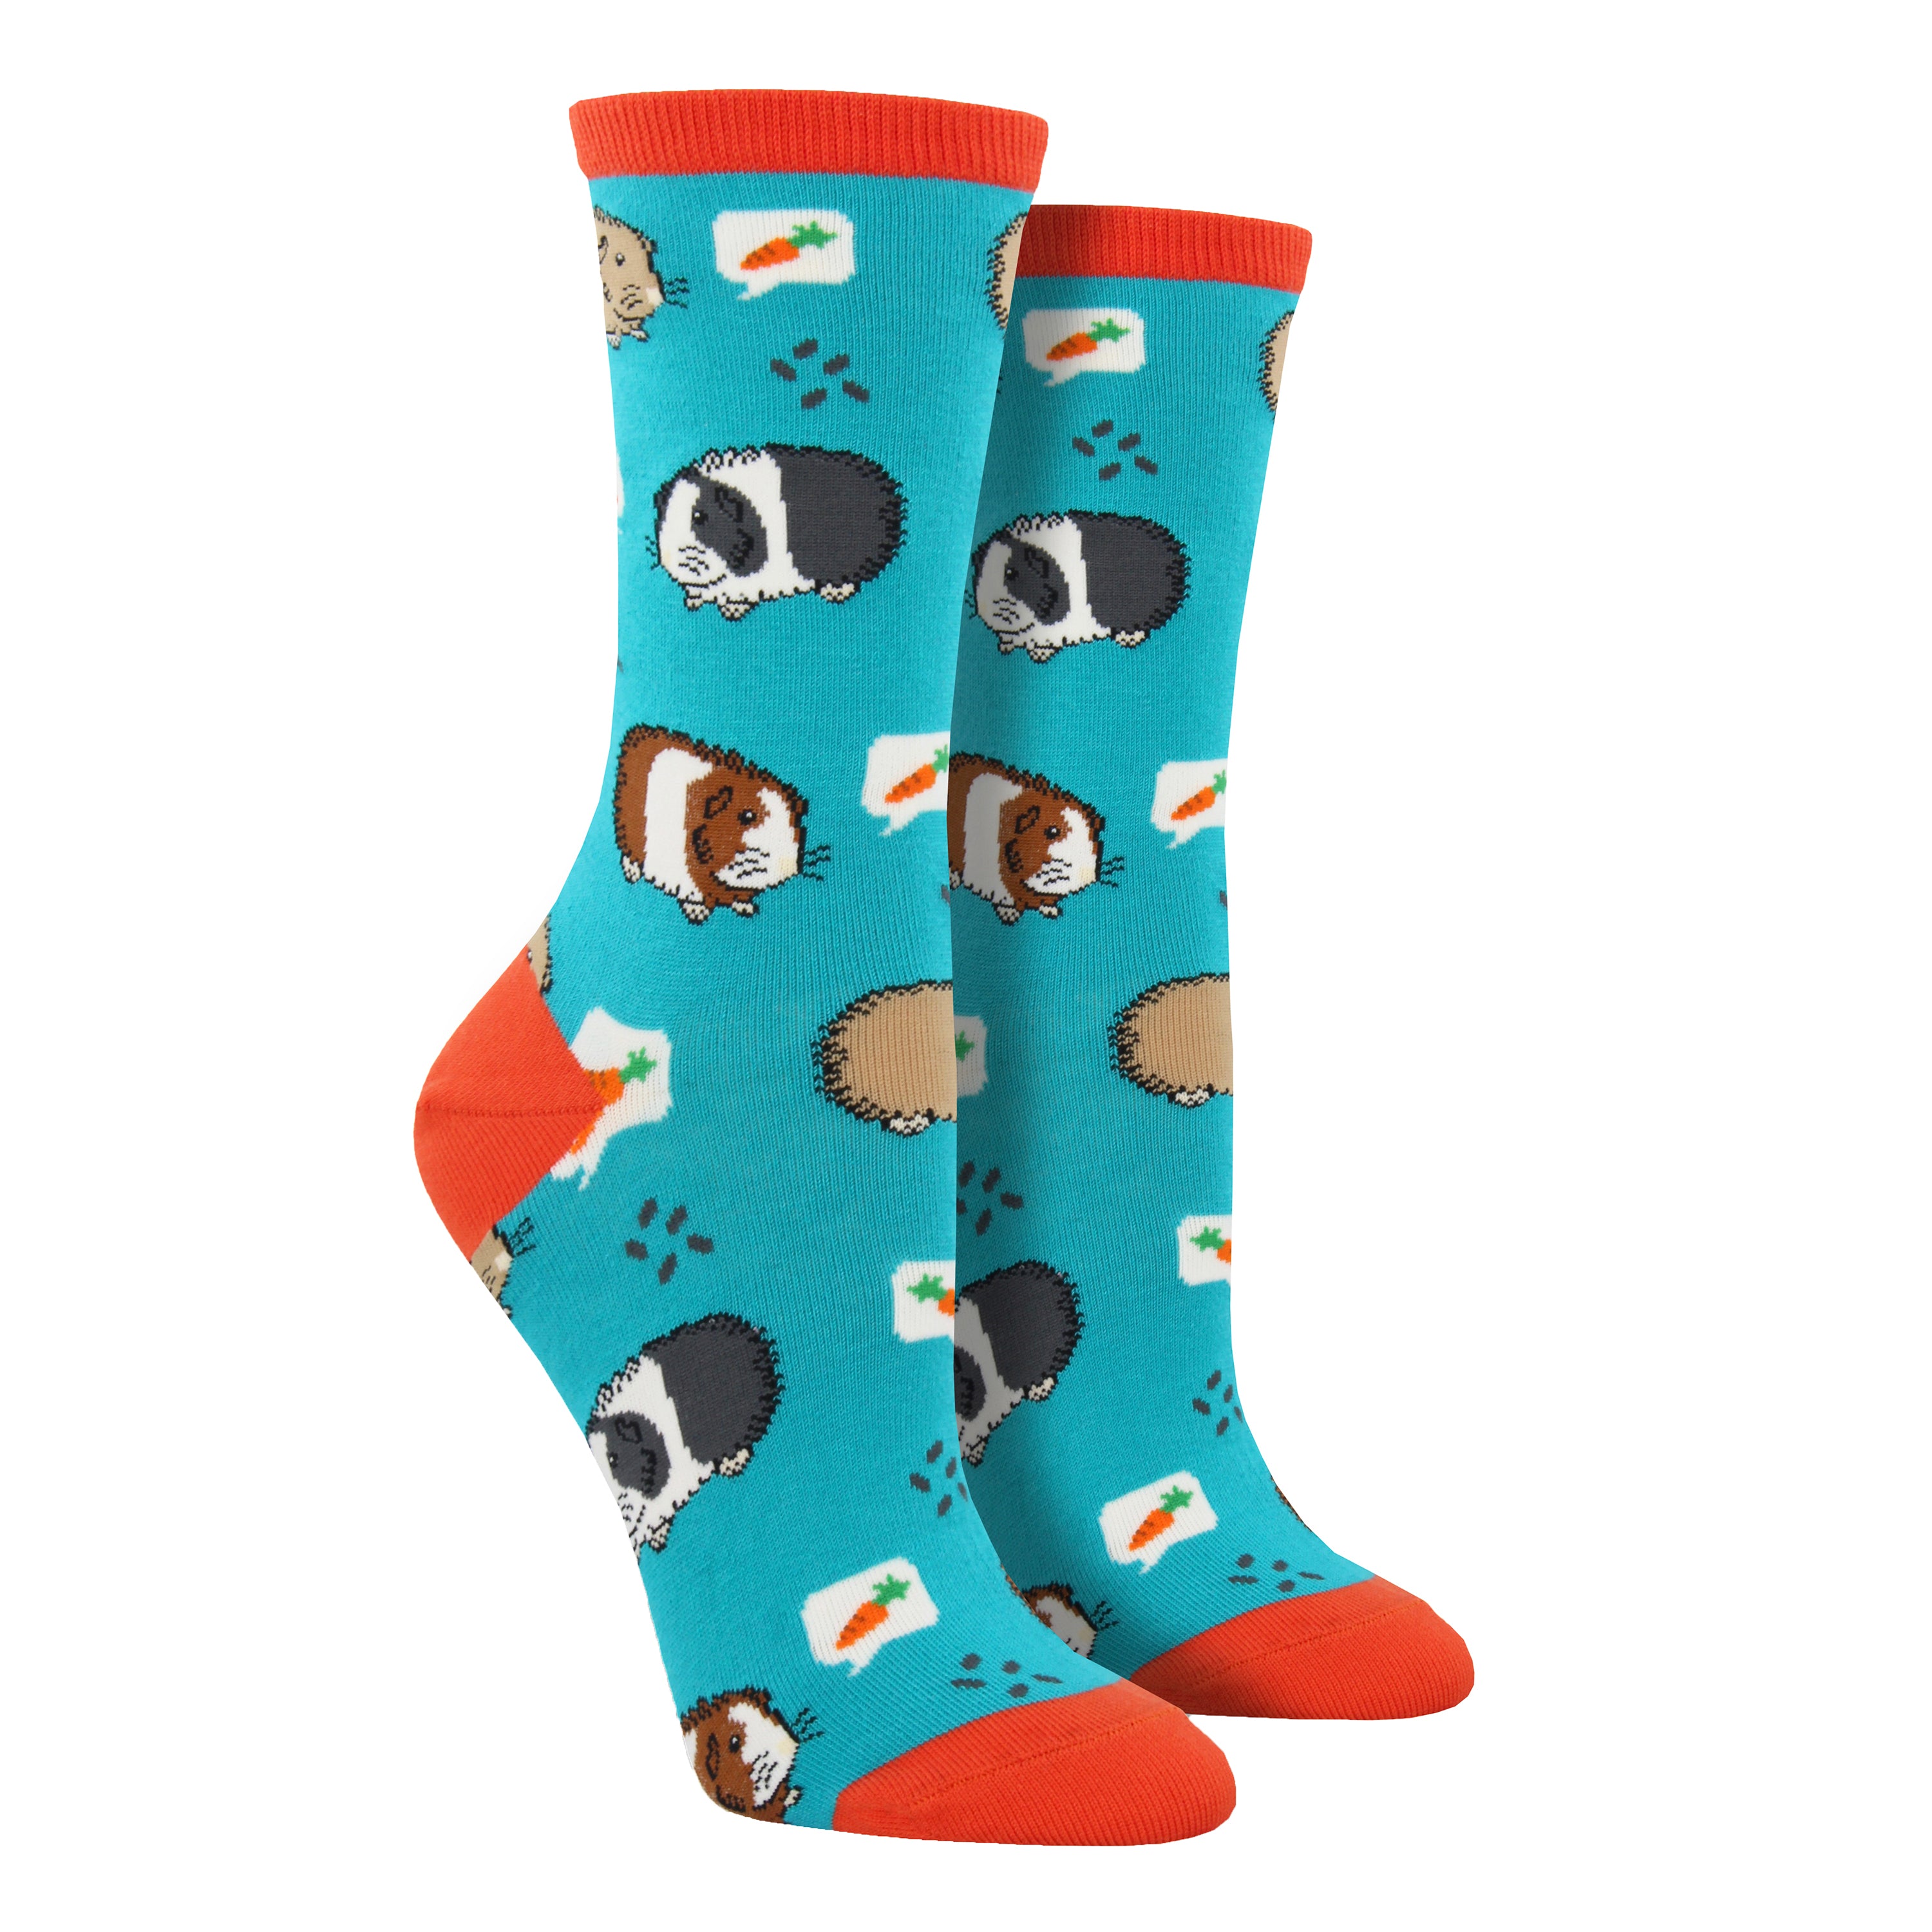 Shown on foot forms, a pair of women's Socksmith brand cotton crew socks in teal with an orange heel, toe, and cuff. The sock has an all over design of guinea pigs thinking about carrots.